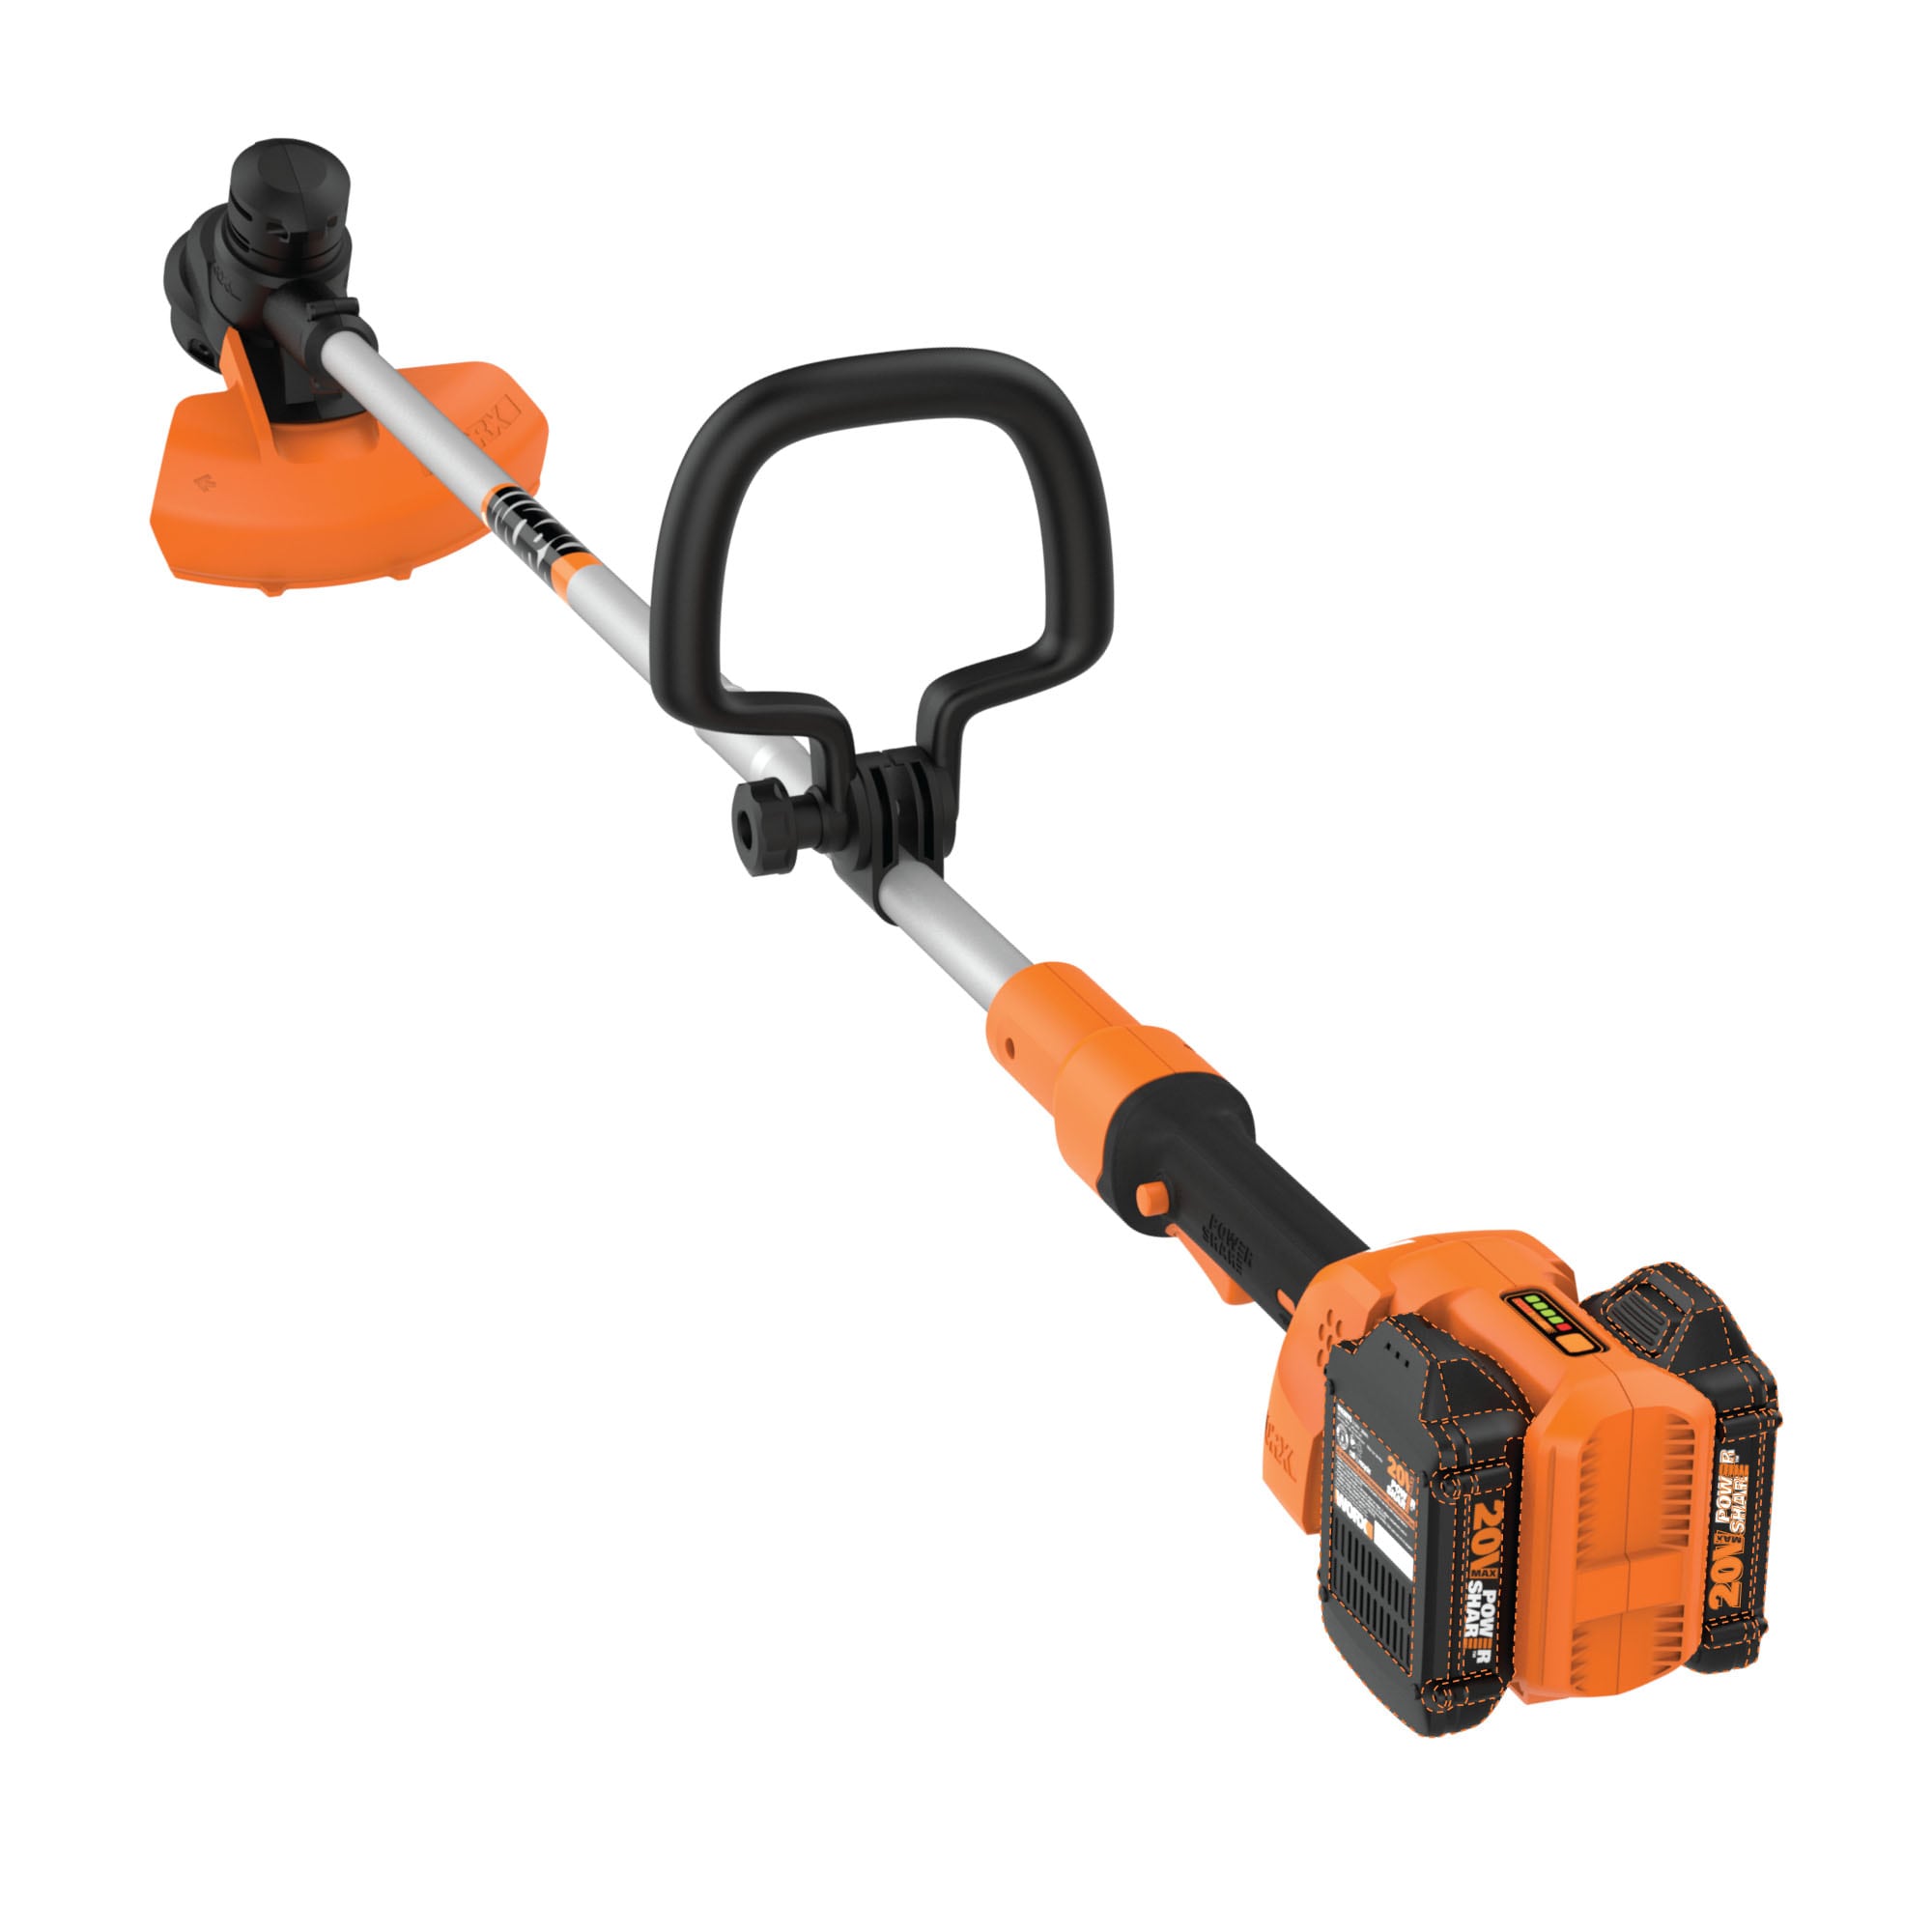  Worx String Trimmer Cordless, Edger 40V Power Share Weed  Trimmer 13 (2 Batteries & Charger Included) WG184 : Patio, Lawn & Garden